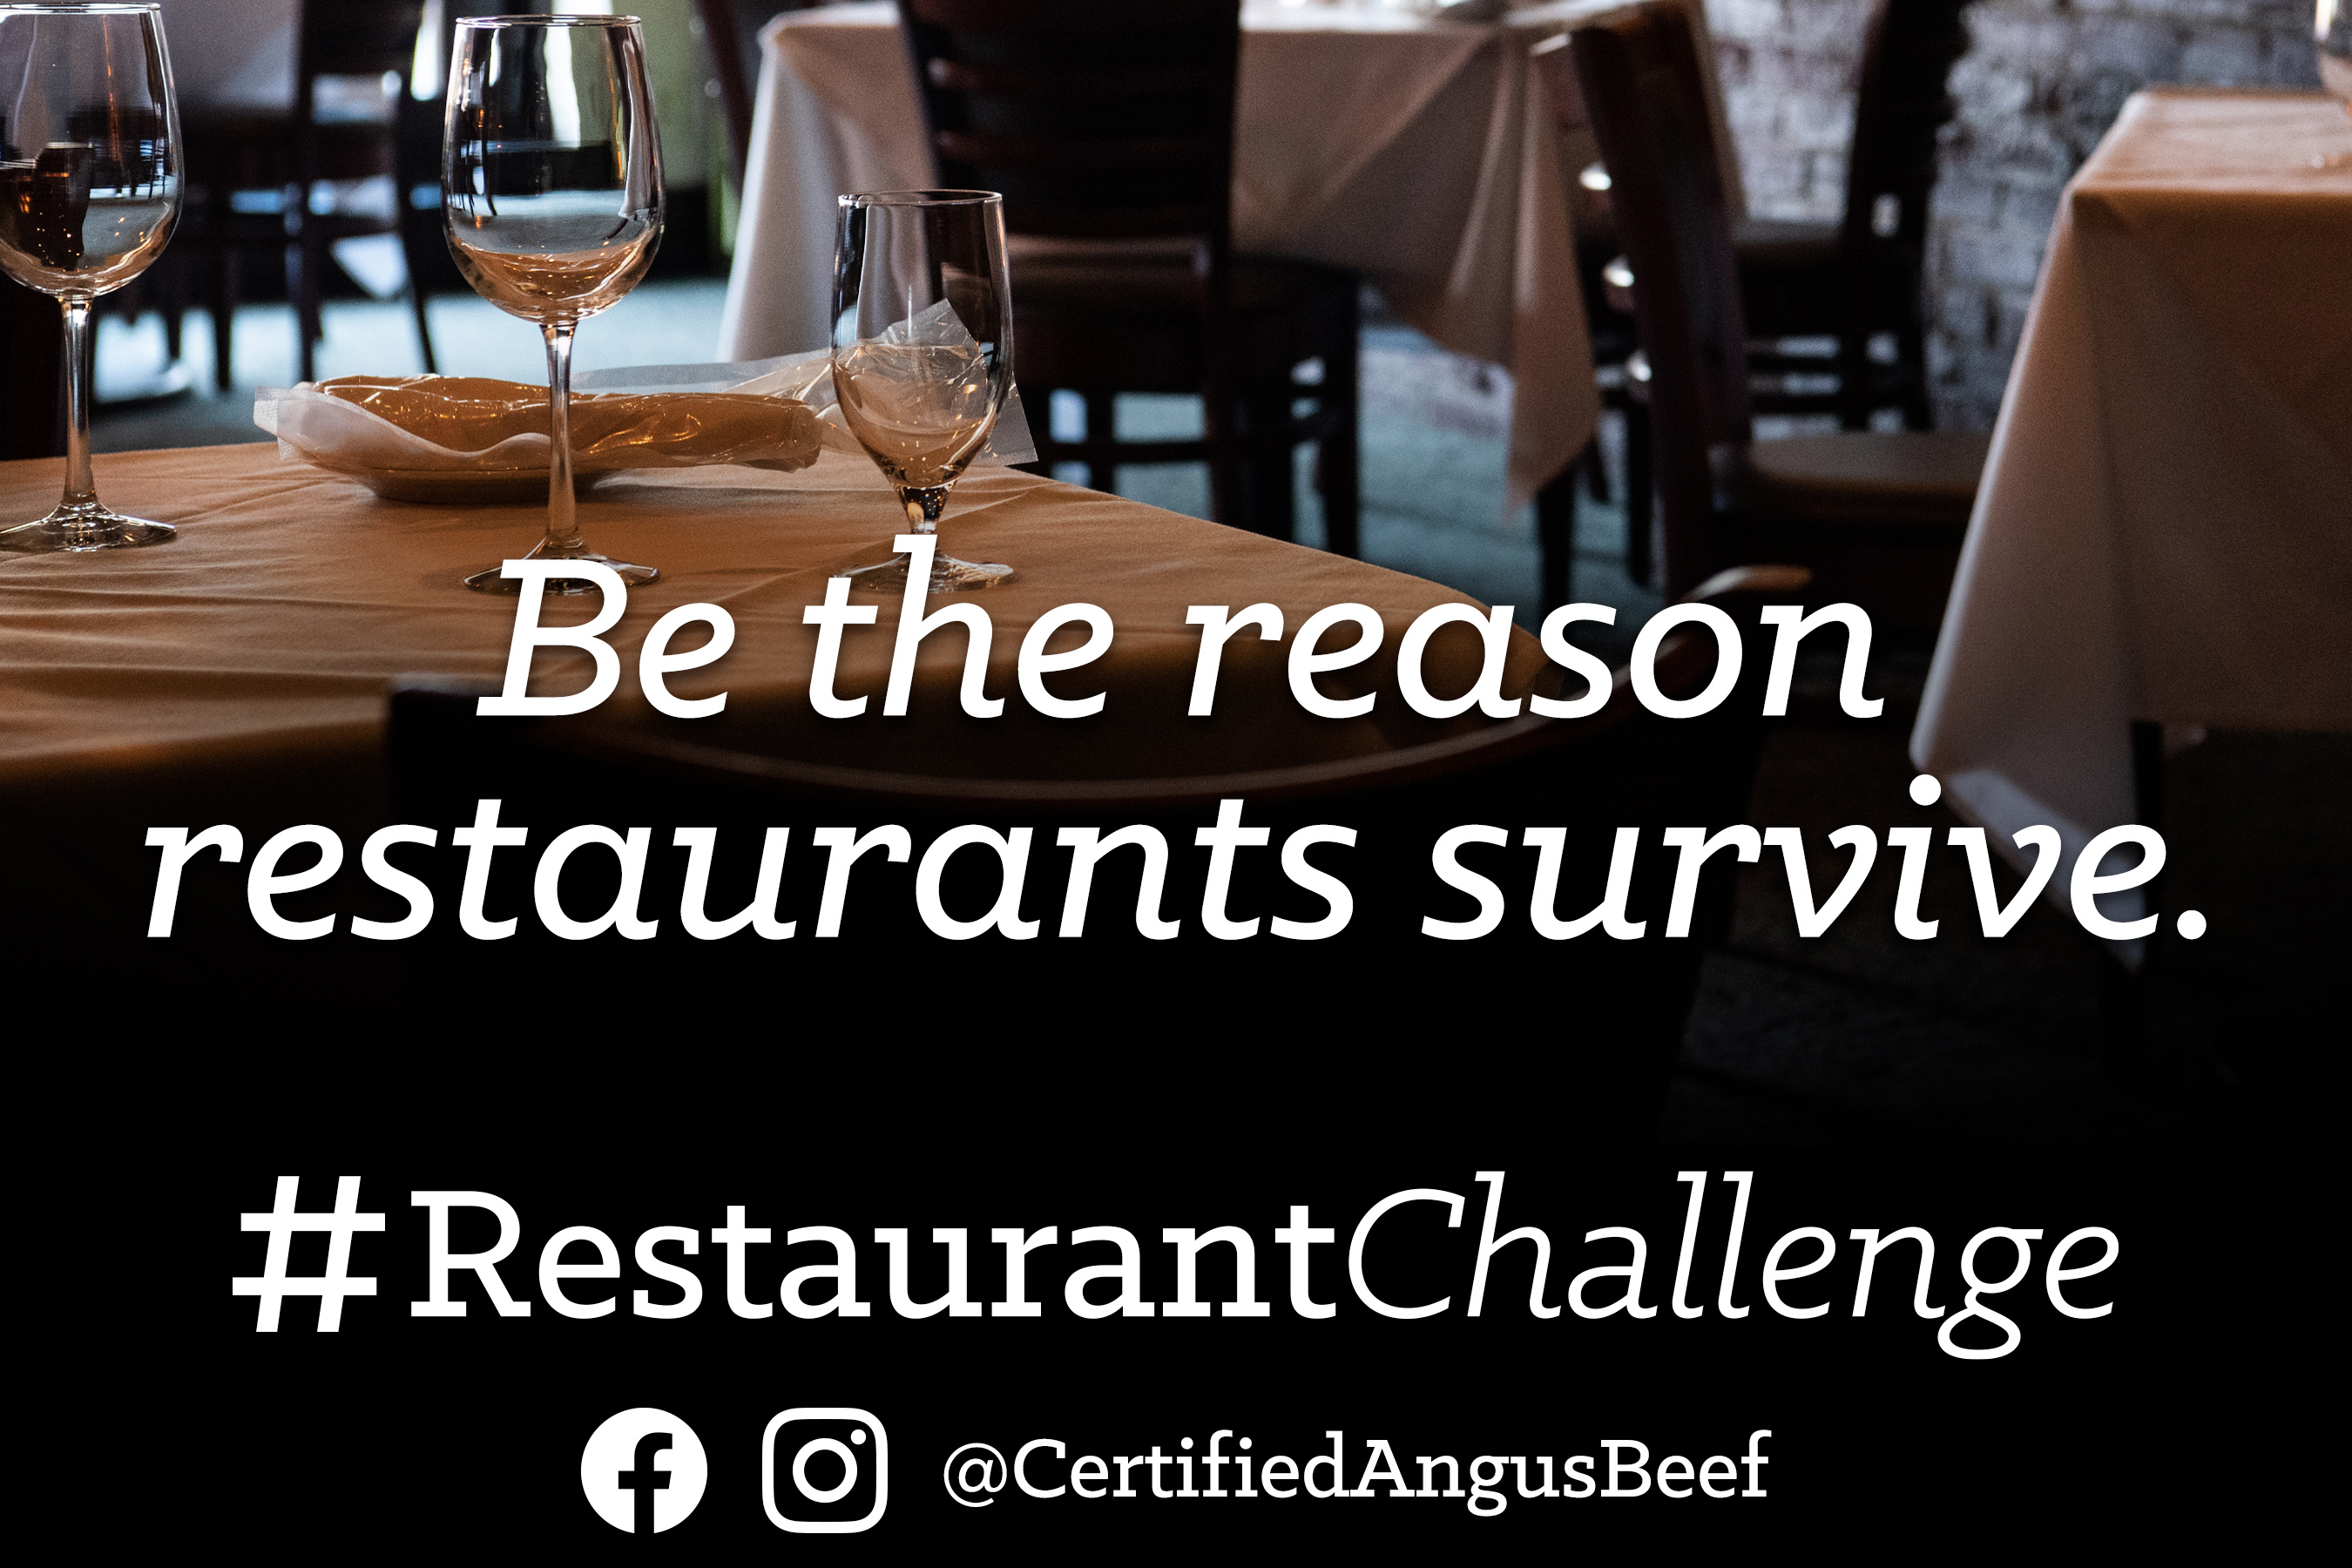 Restaurant image with the caption, "Be the reason restaurants survive."